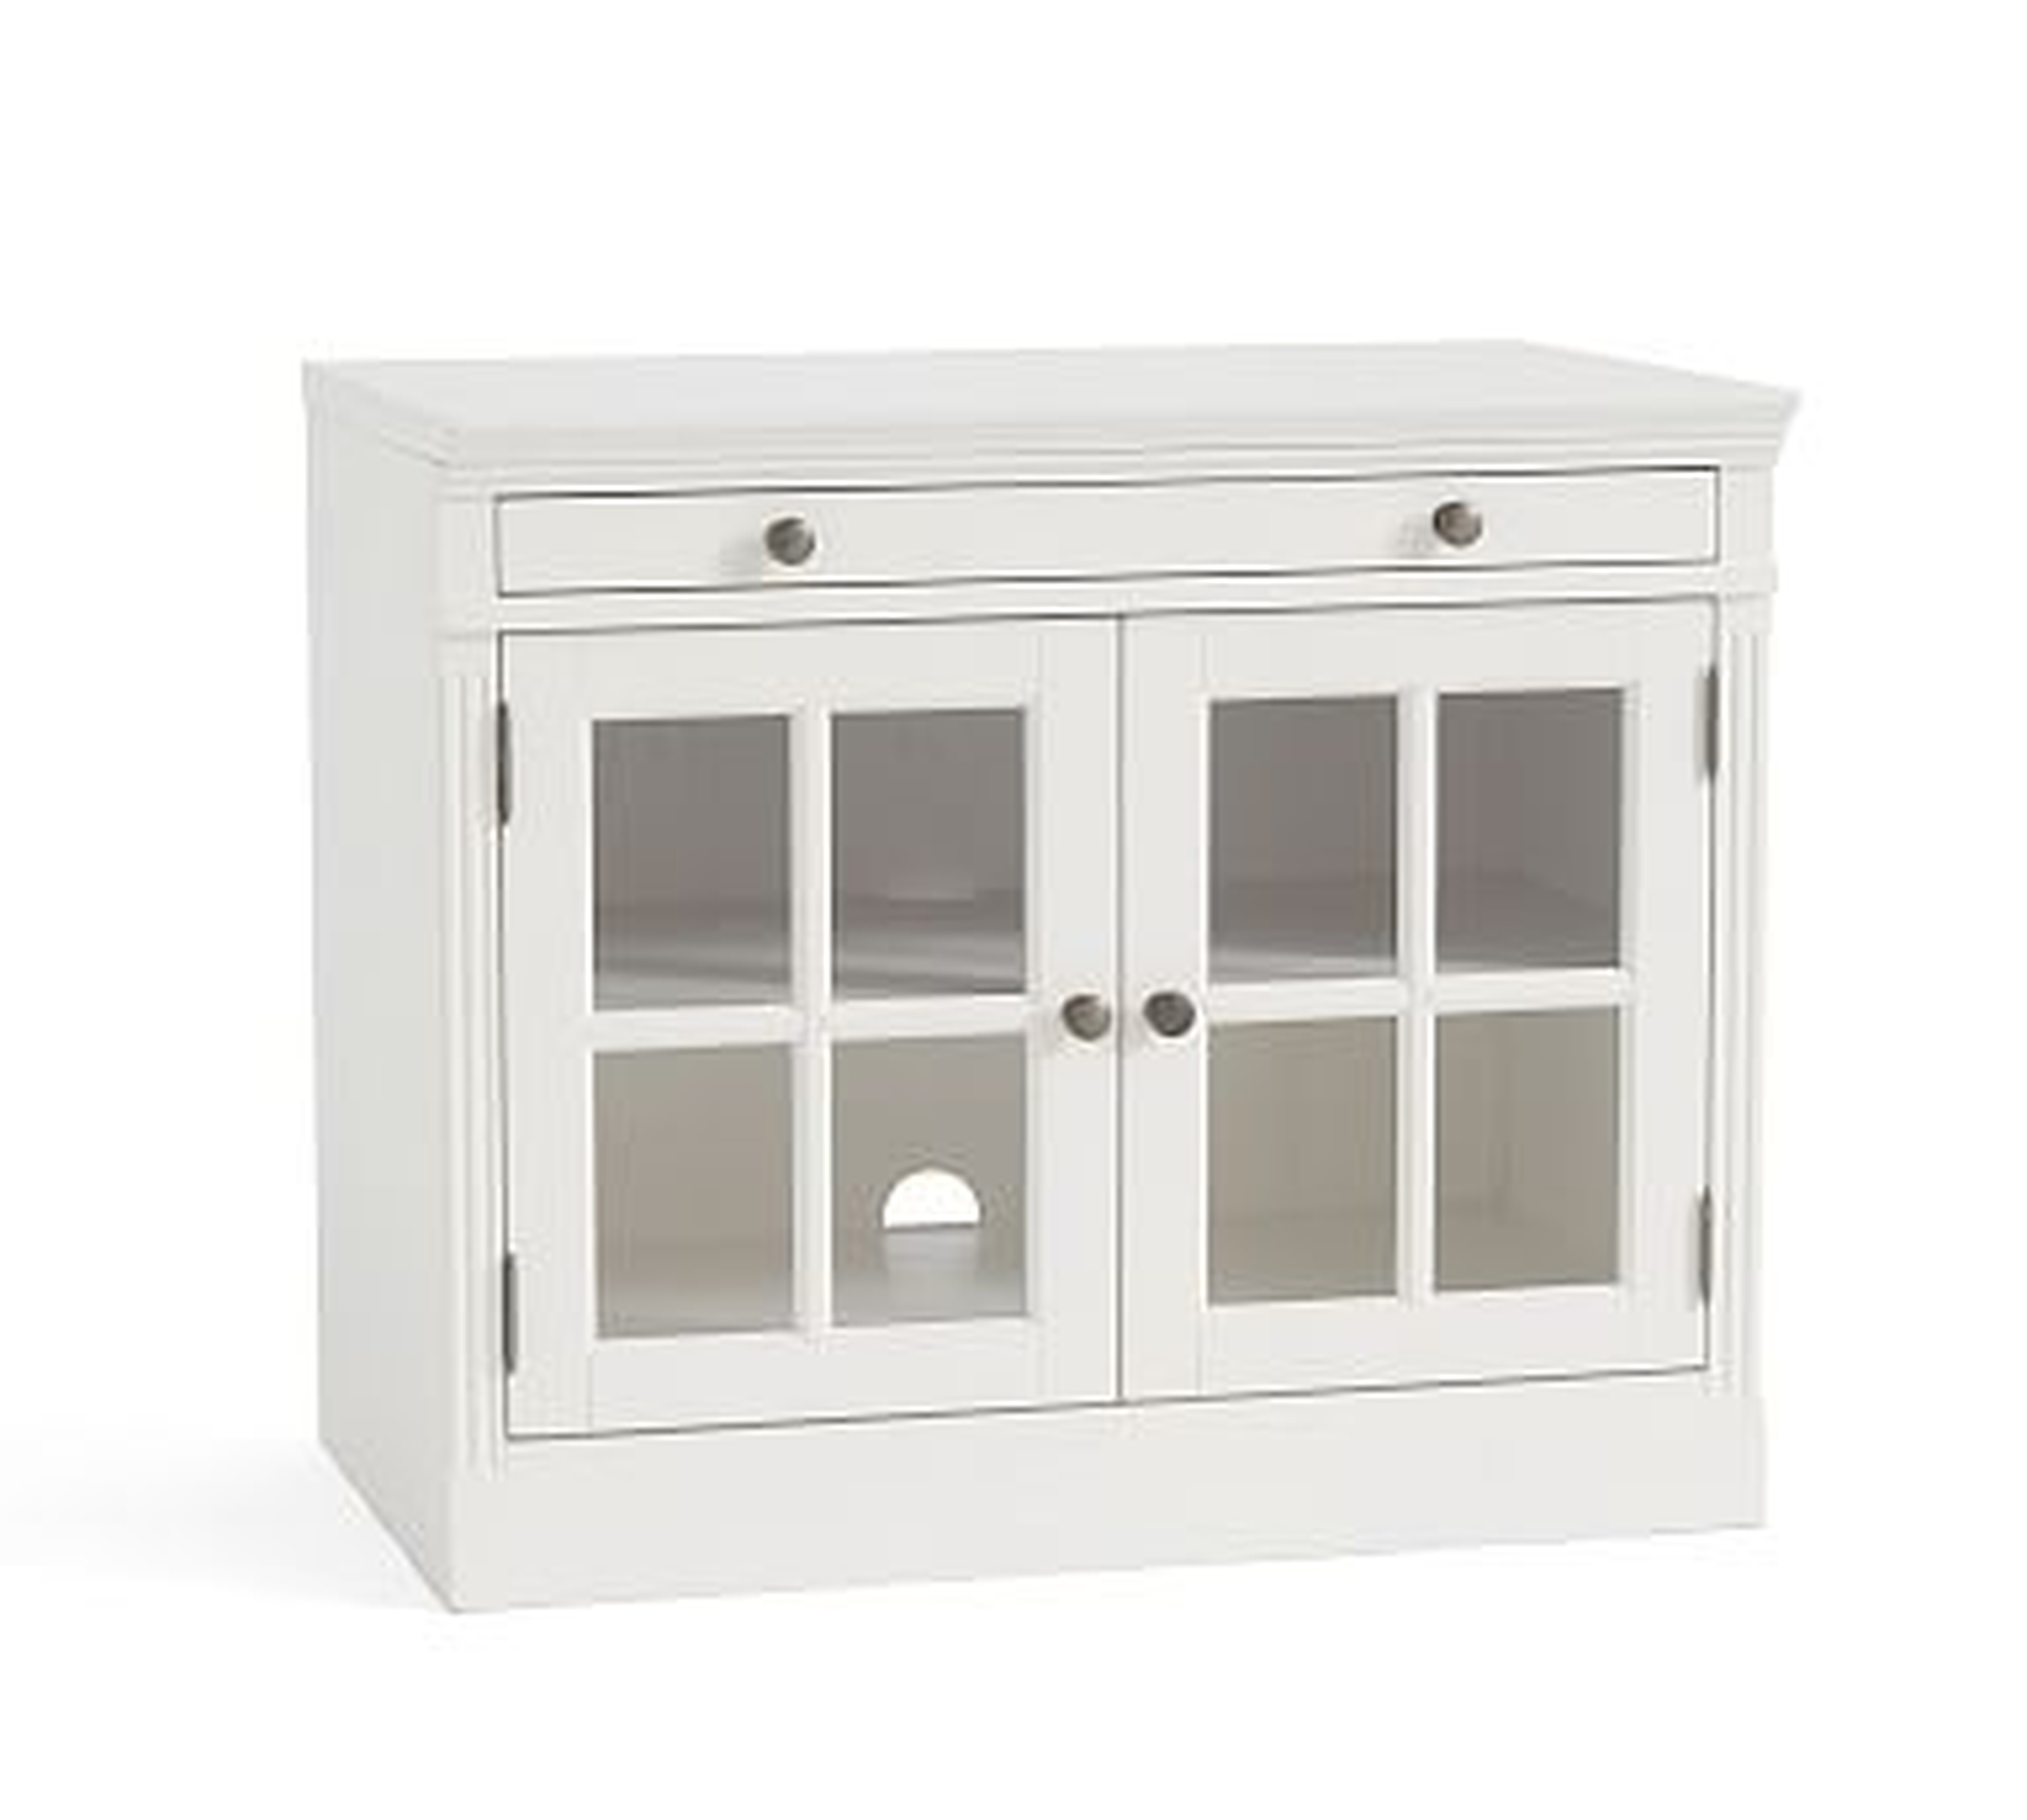 Livingston 35" Glass Door Cabinet with Top, Montauk White - Pottery Barn